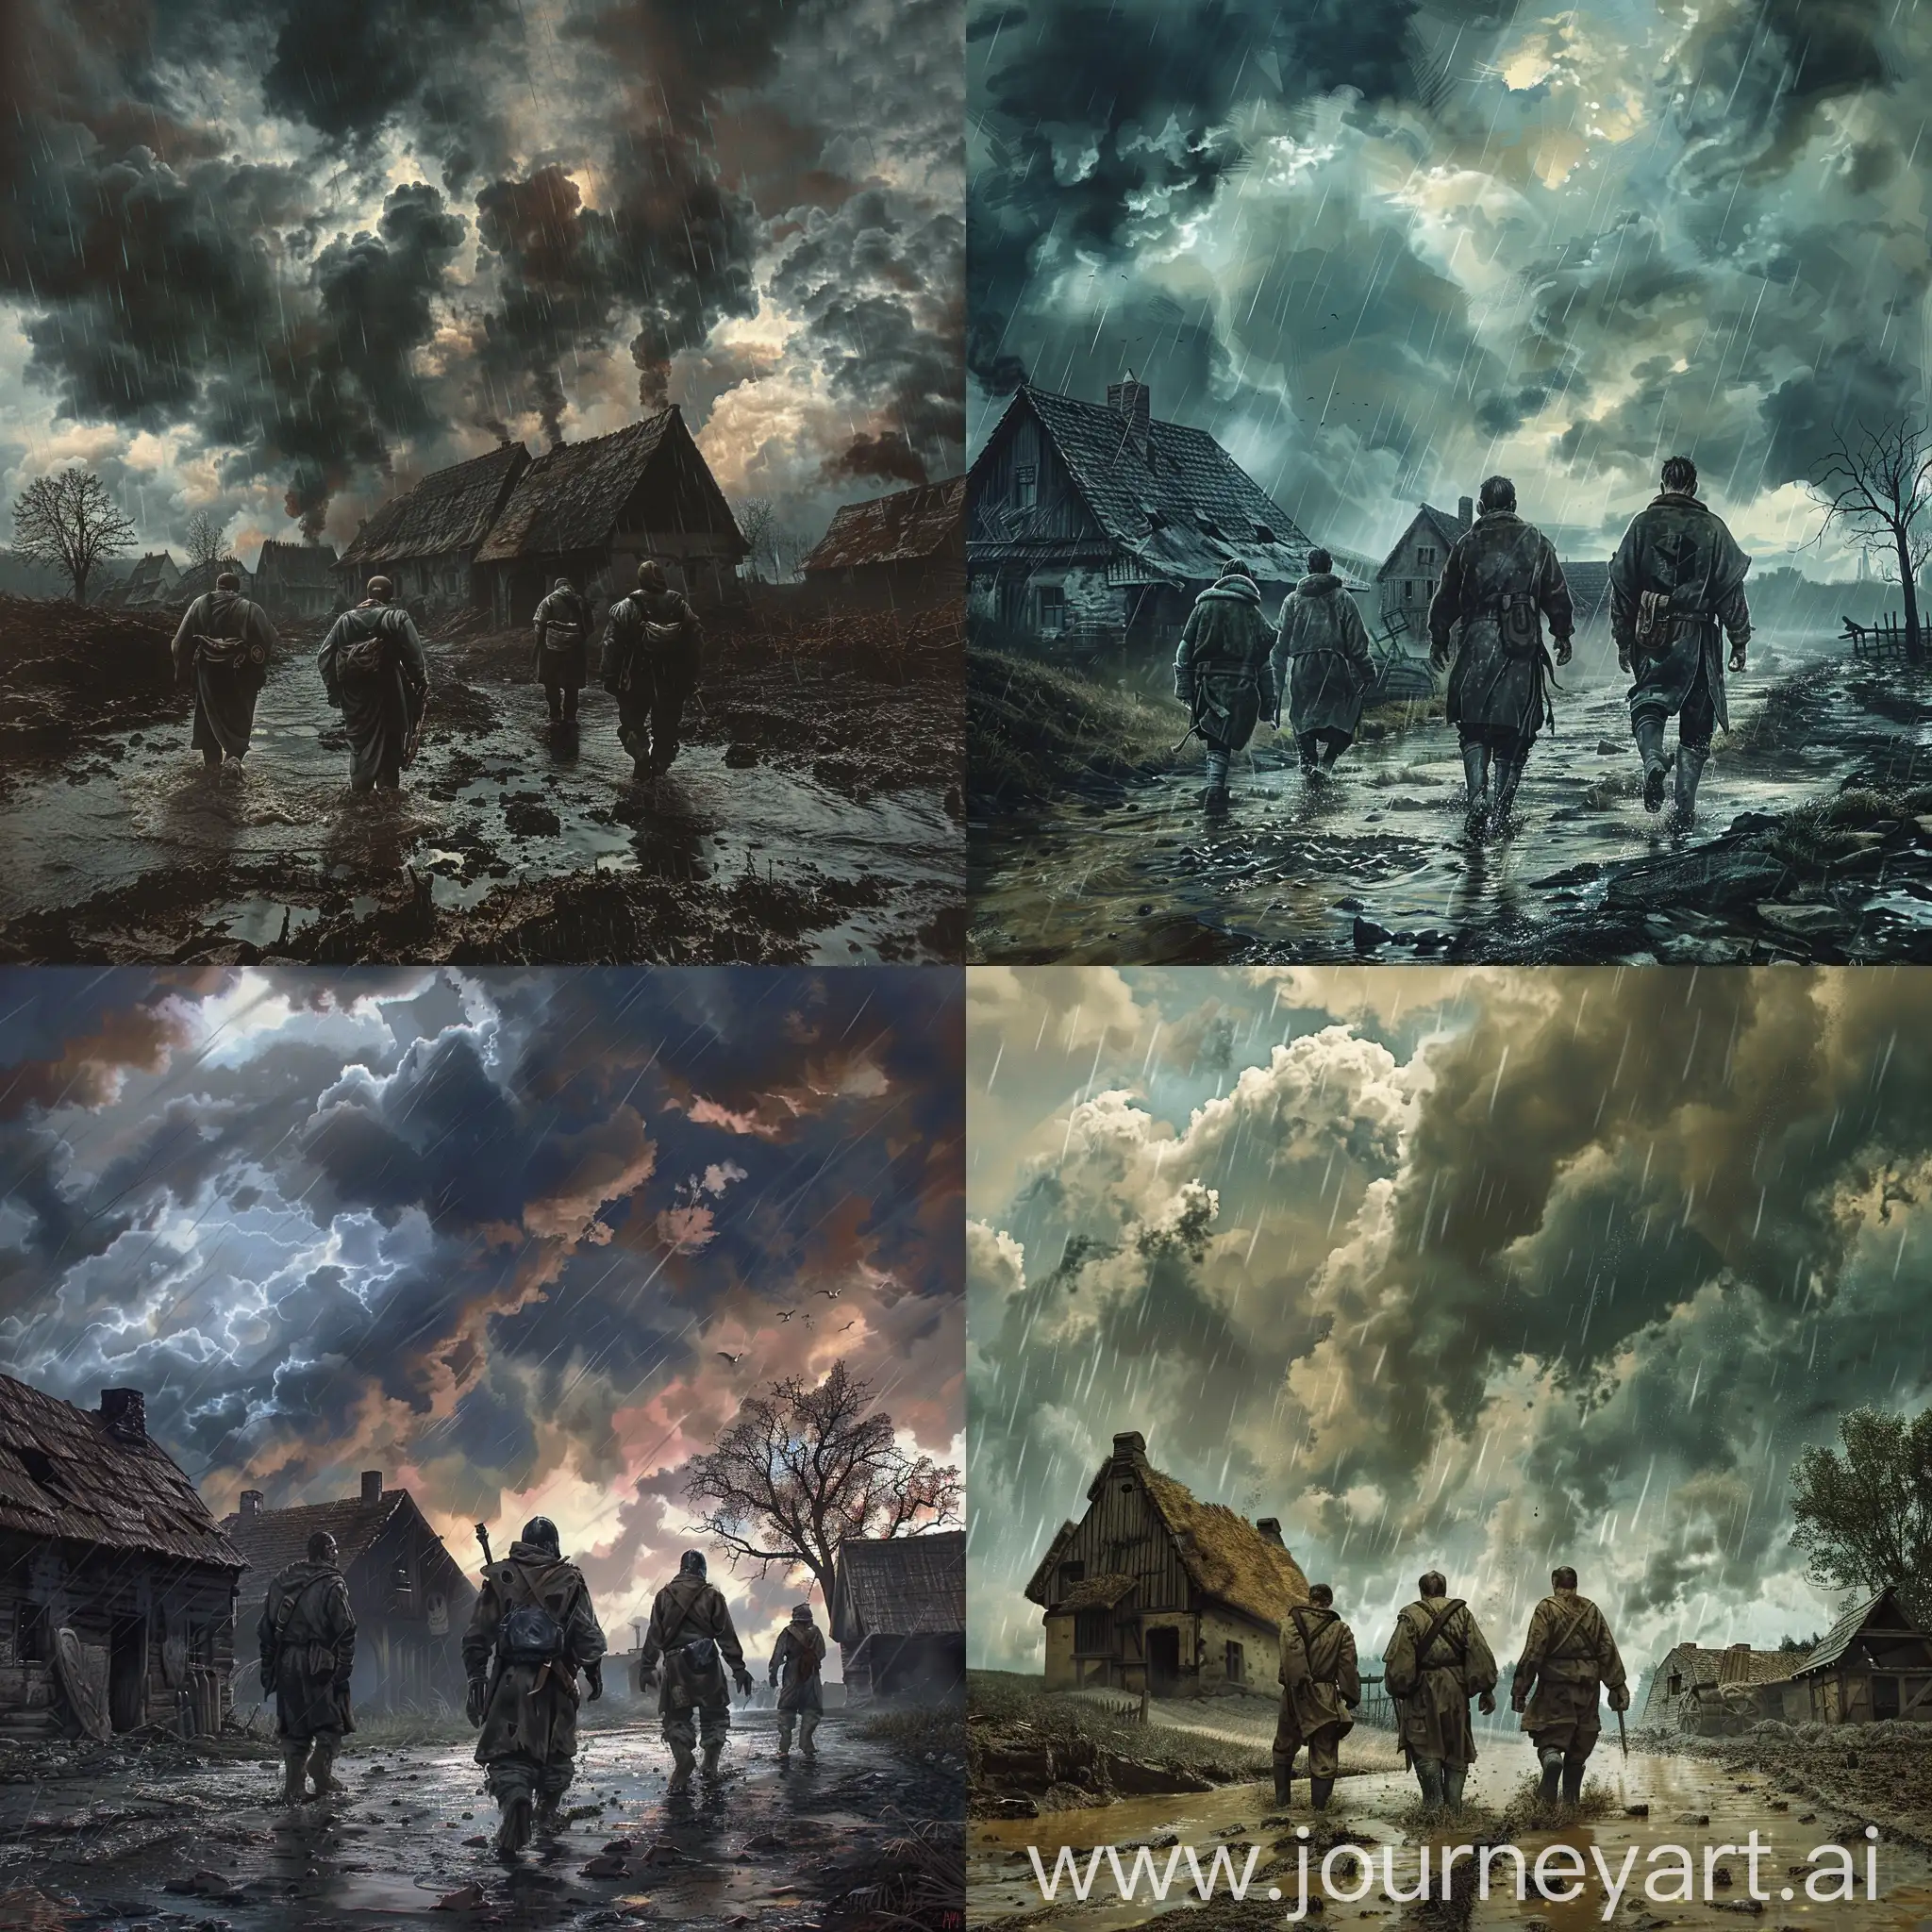 Imagine a haunting scene set in a desolate, impoverished Germanic village. The sky above is thick with storm clouds, unleashing a relentless downpour upon the rugged landscape. In the foreground, three weary men trudge through the muddy streets, their clothing tattered and soaked from the relentless rain. Each man carries the weight of survival on his shoulders, their faces etched with exhaustion and determination. Despite their hardships, there is a glimmer of hope in their eyes as they approach the humble dwellings of the village, seeking refuge and perhaps a chance at redemption. Capture the raw emotion and stark contrast between the resilience of the human spirit and the unforgiving forces of nature in this poignant moment. Retro Fantasy Art Style